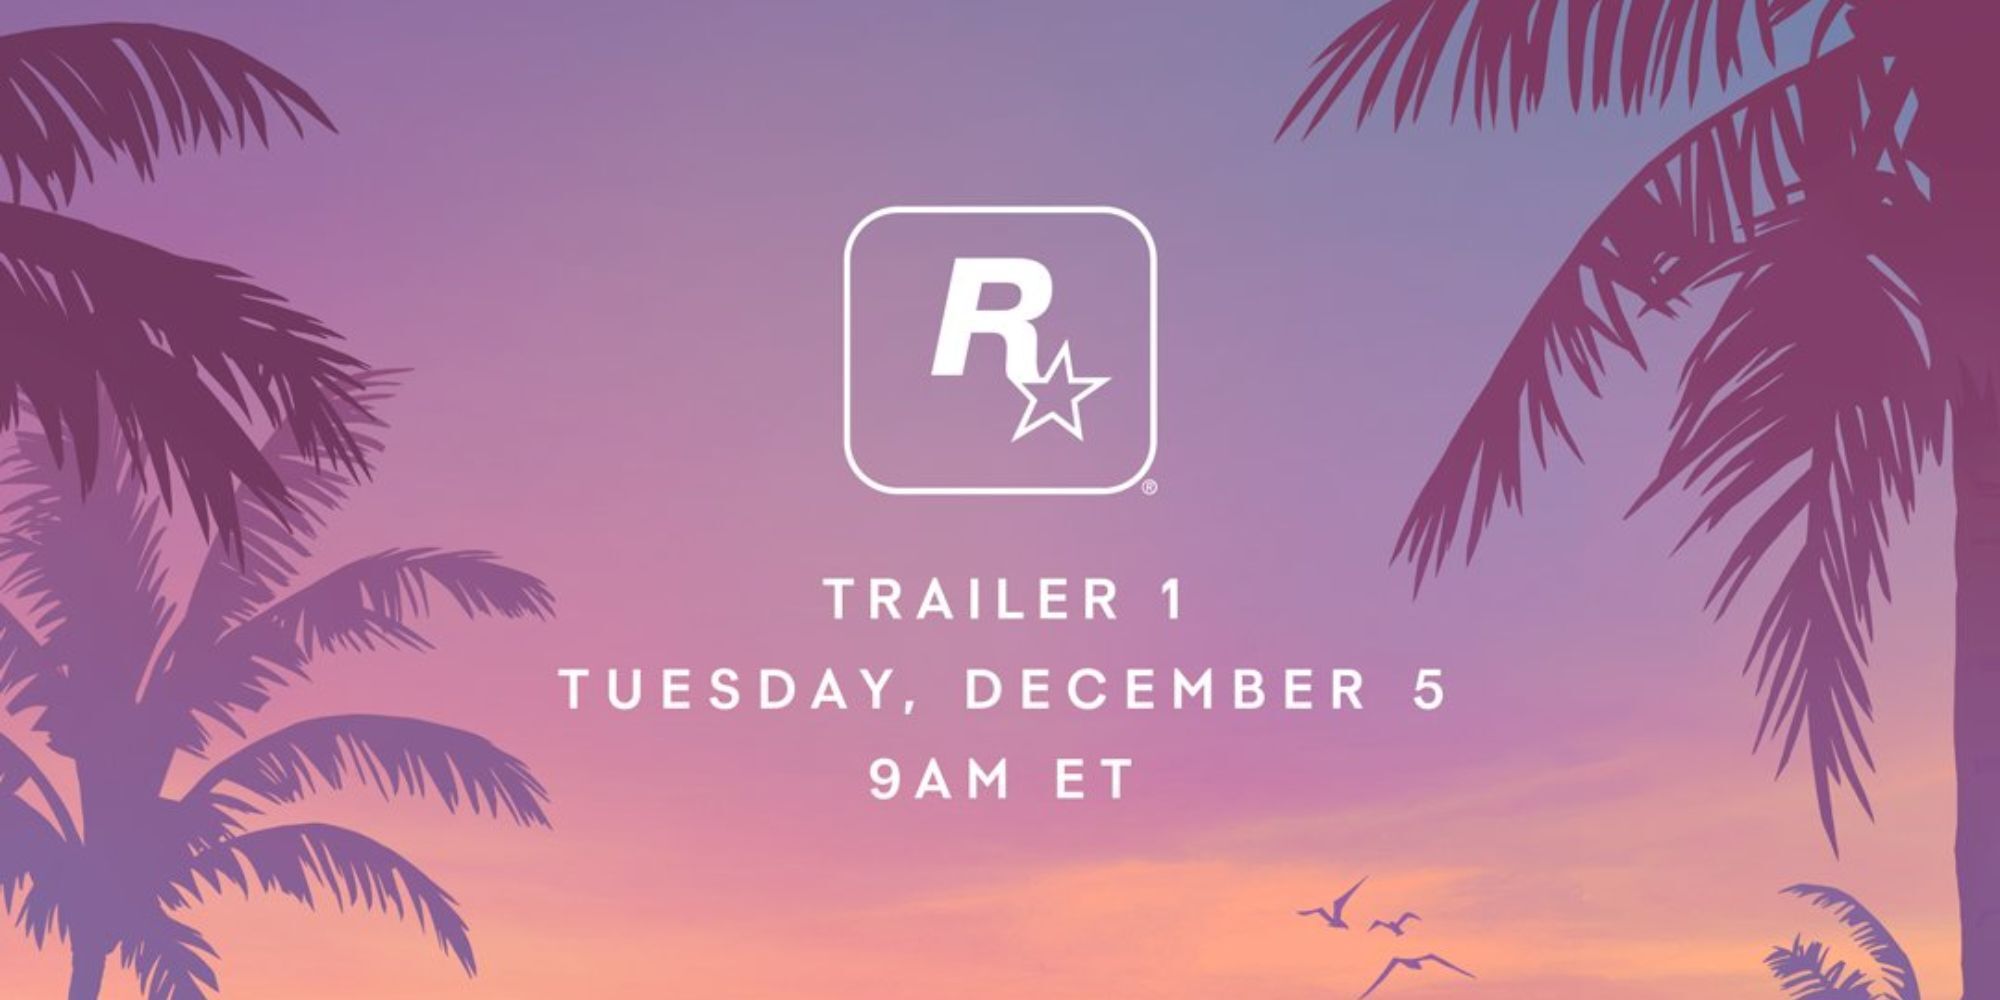 GTA6 trailer teaser, revealing that it will be shared on December 5 at 9am PT